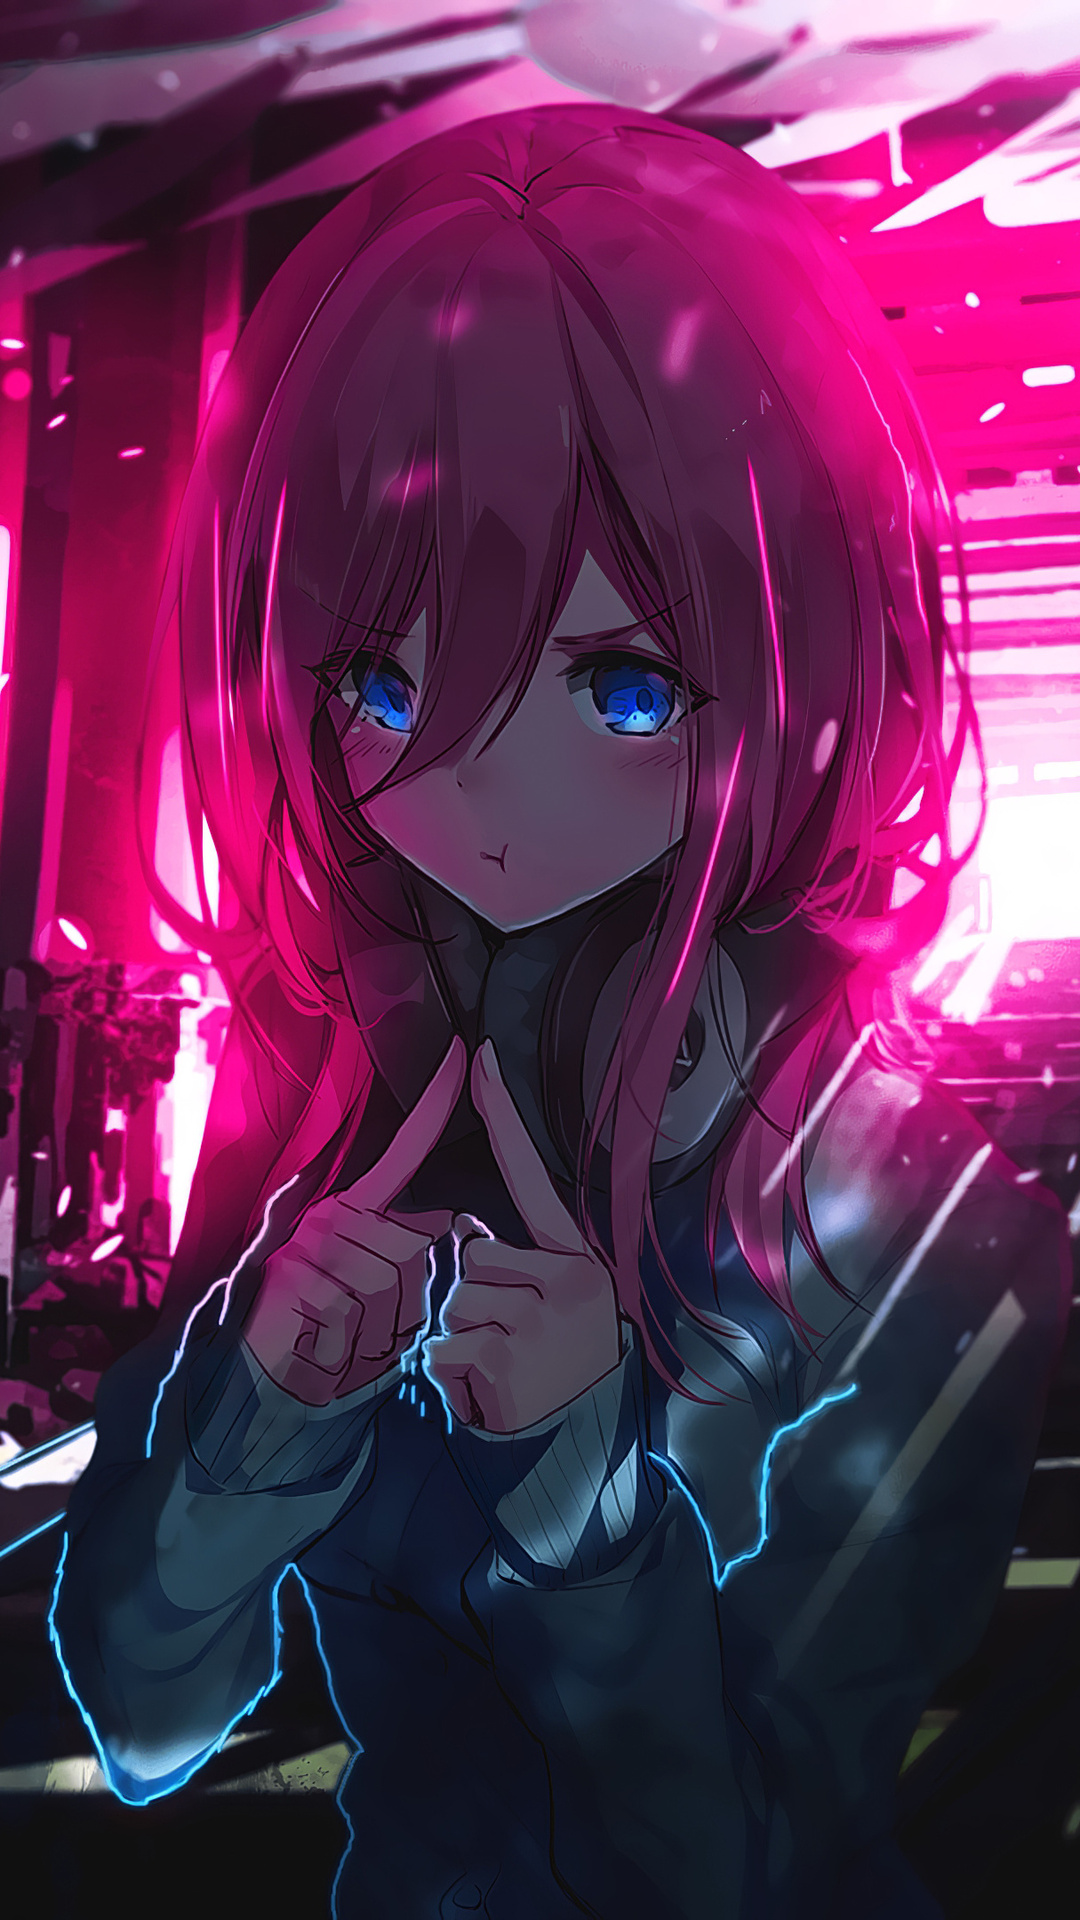 Anime Full HD Android Wallpapers - Wallpaper Cave